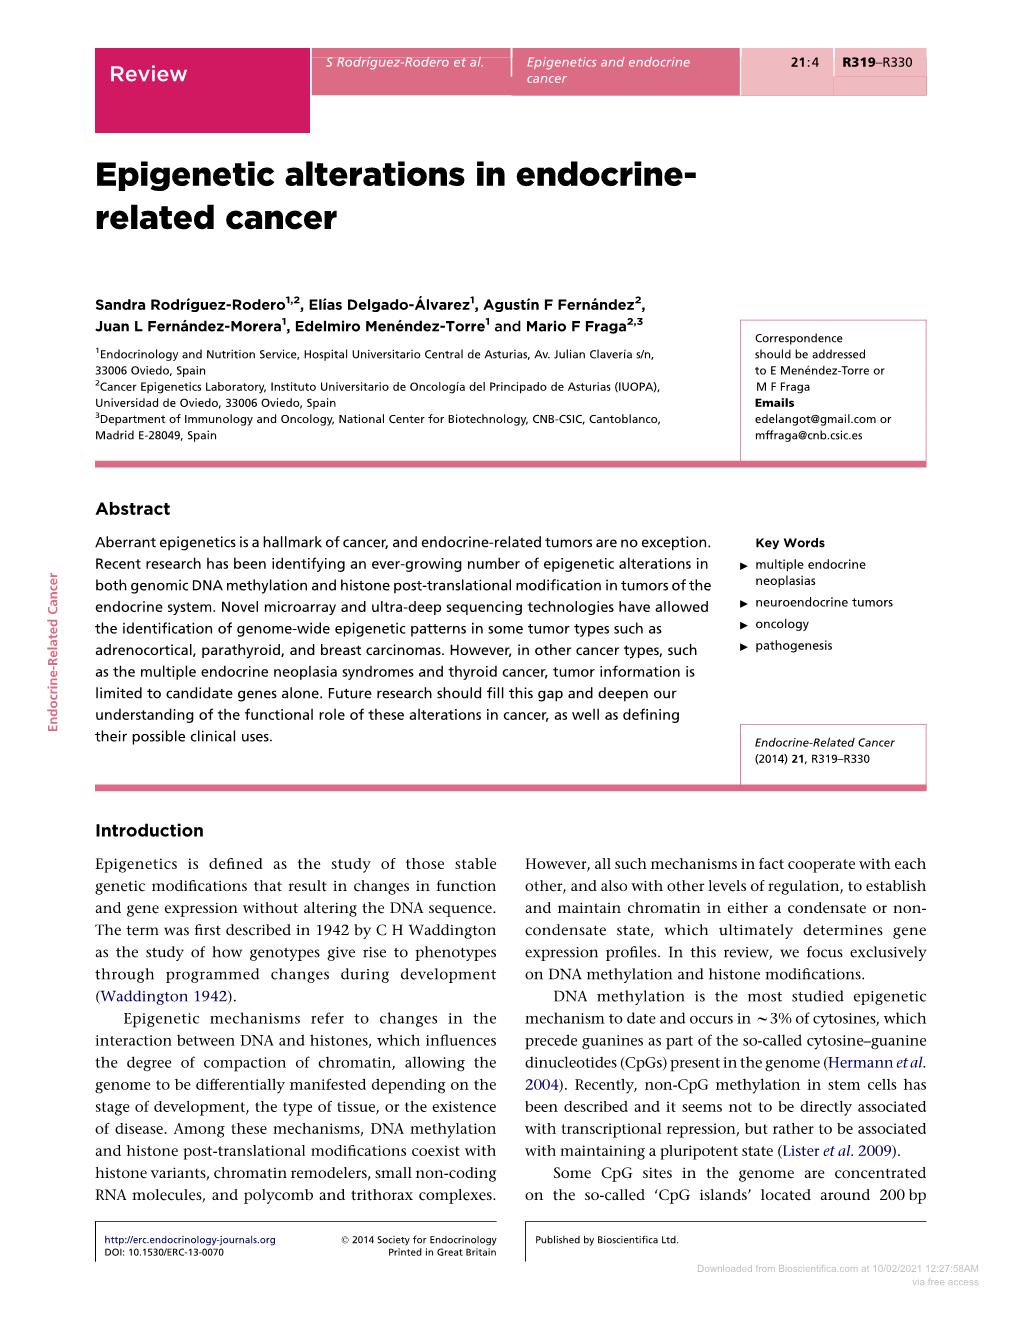 Epigenetic Alterations in Endocrine- Related Cancer